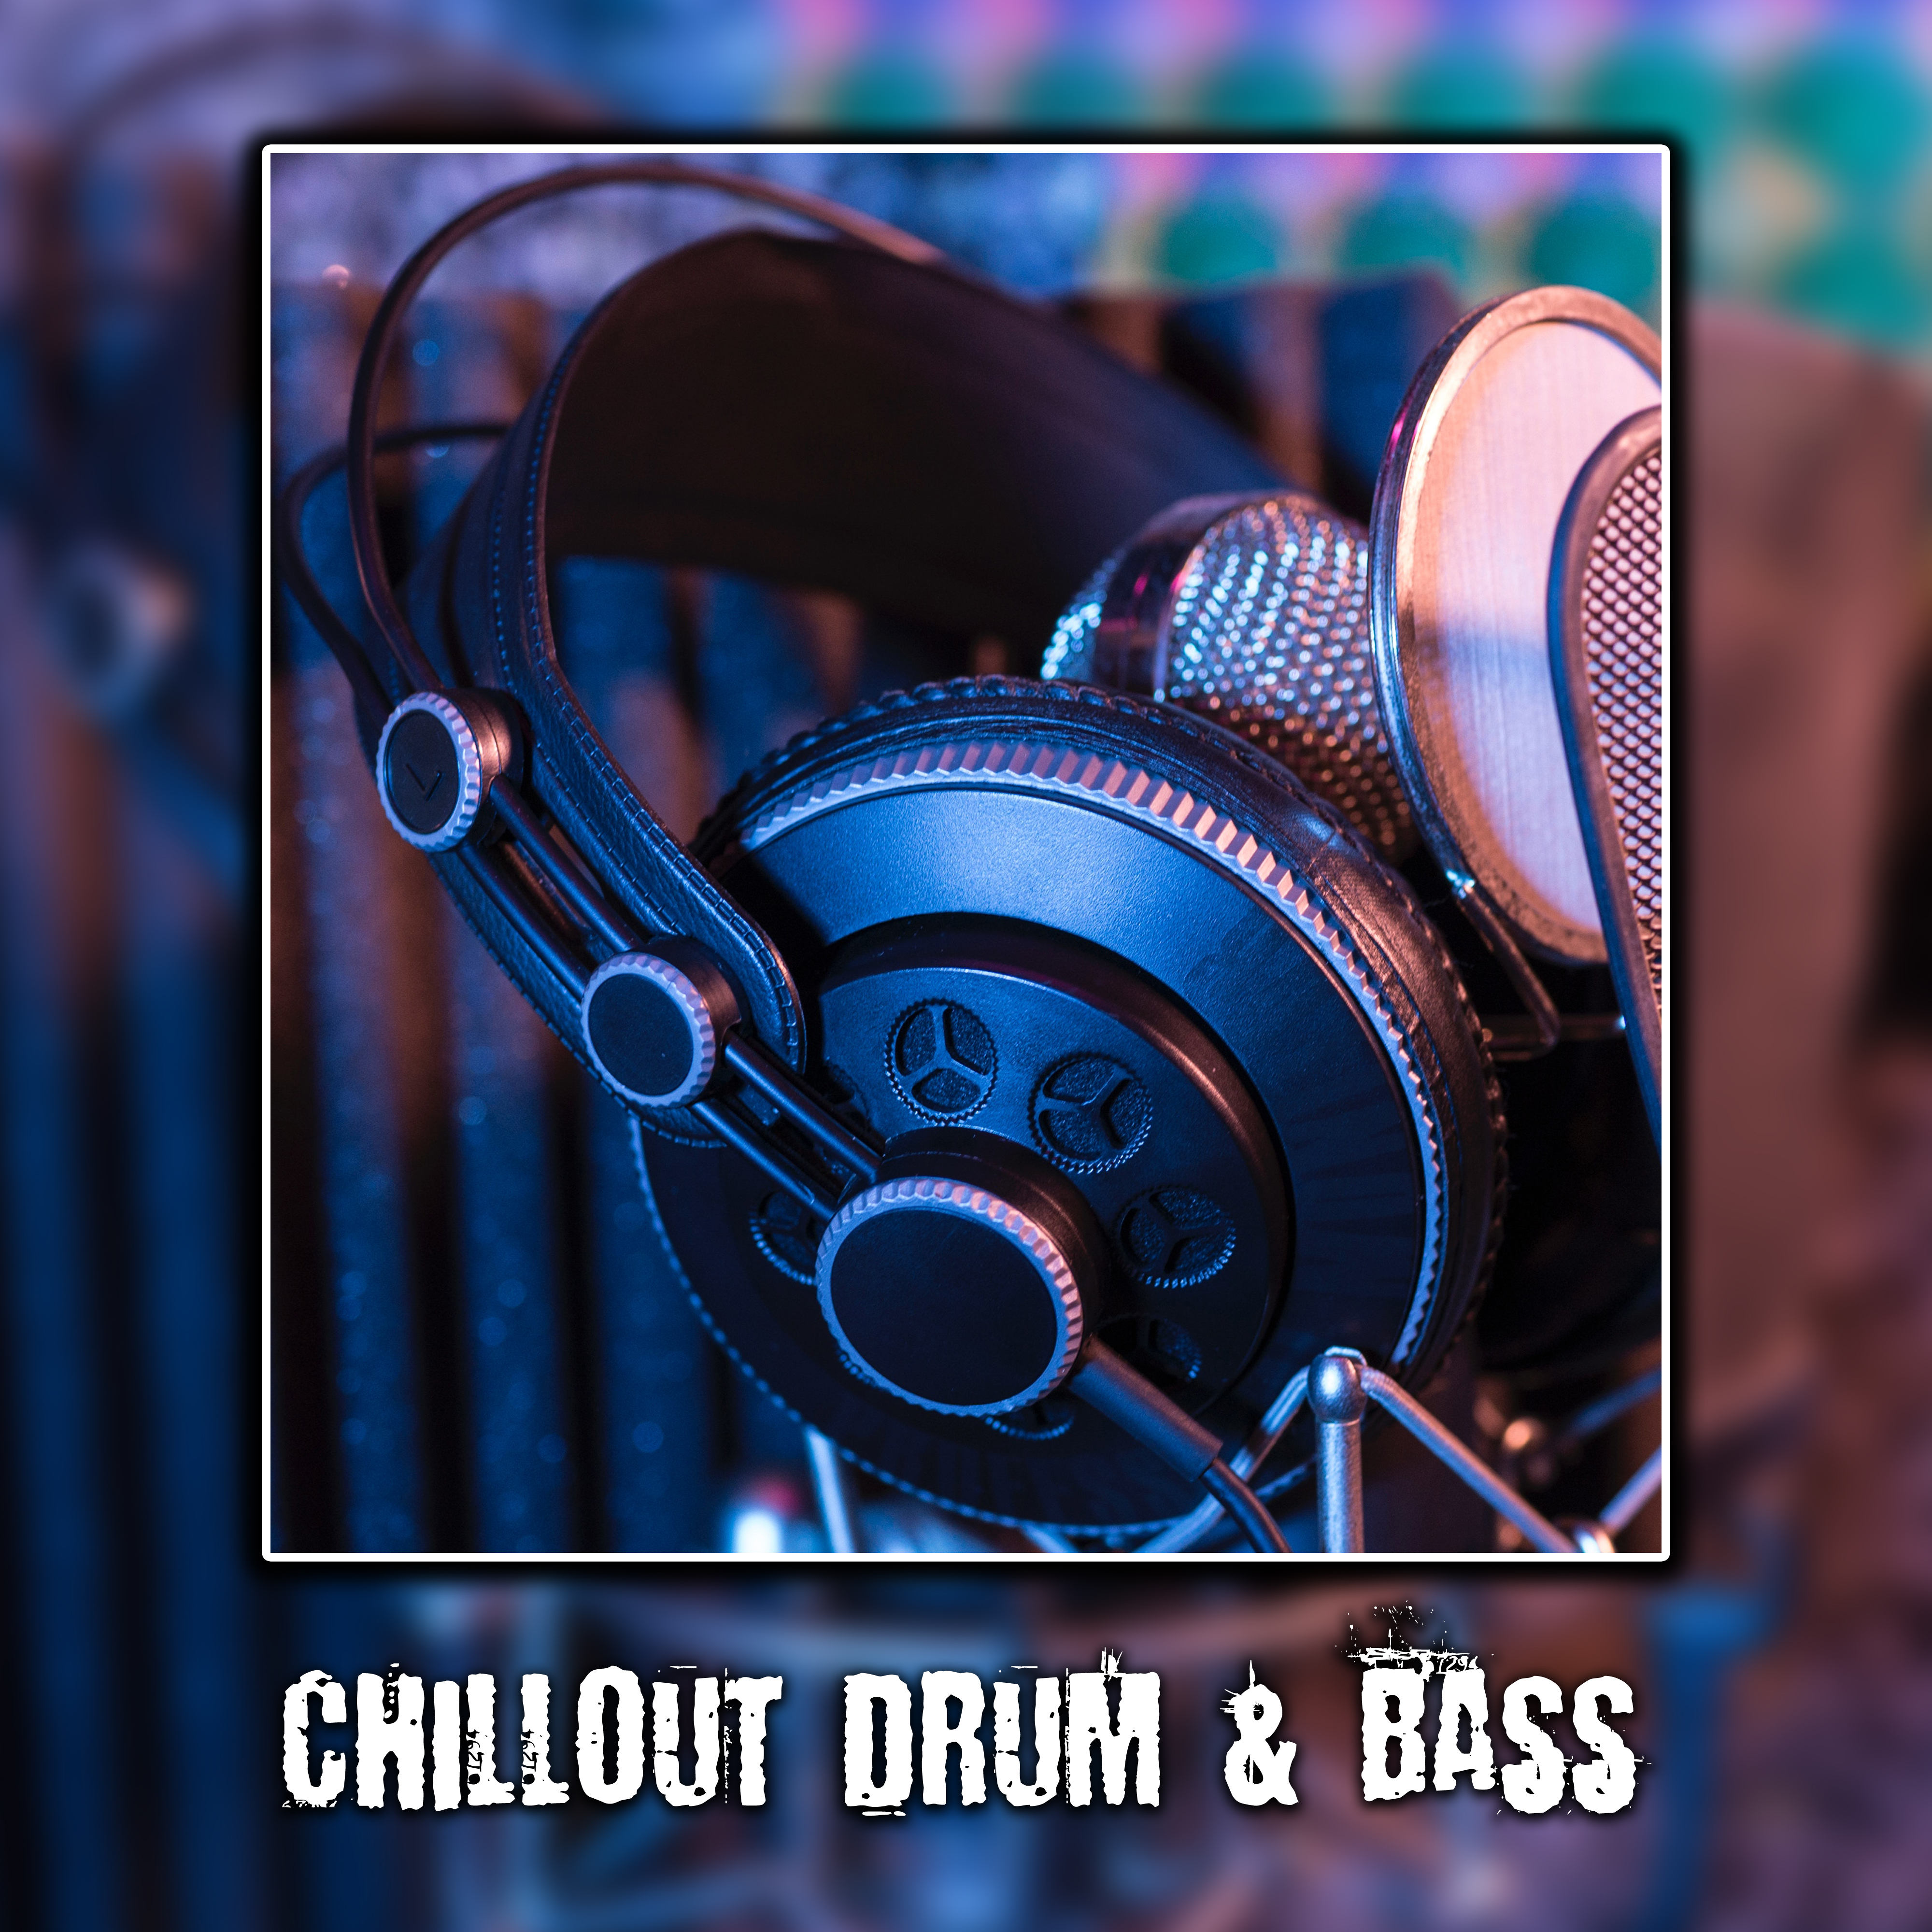 Chillout Drum & Bass